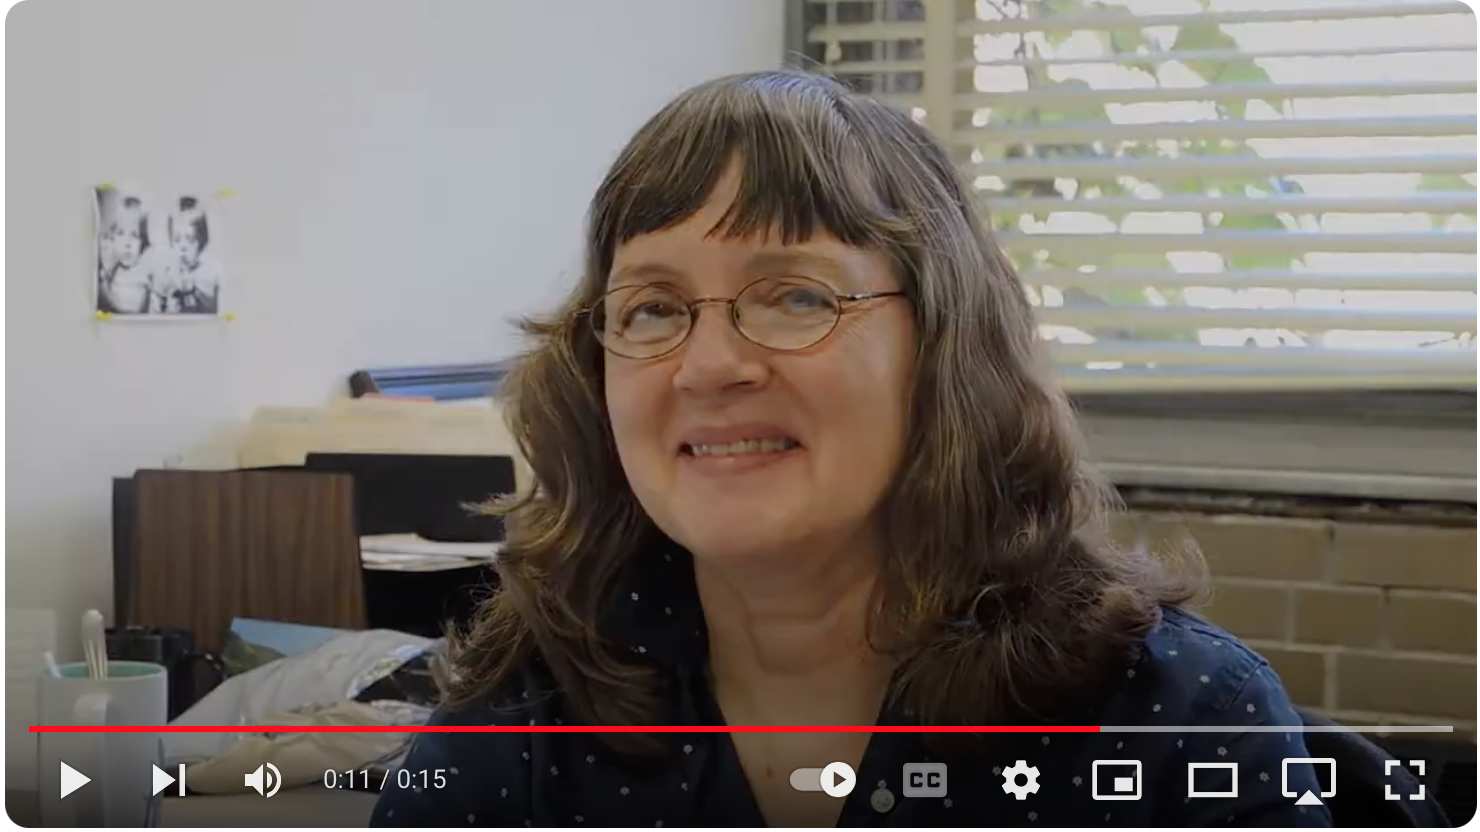 Thumbnail from social post video featuring Giving Day trivia with Professor Margaret Power.